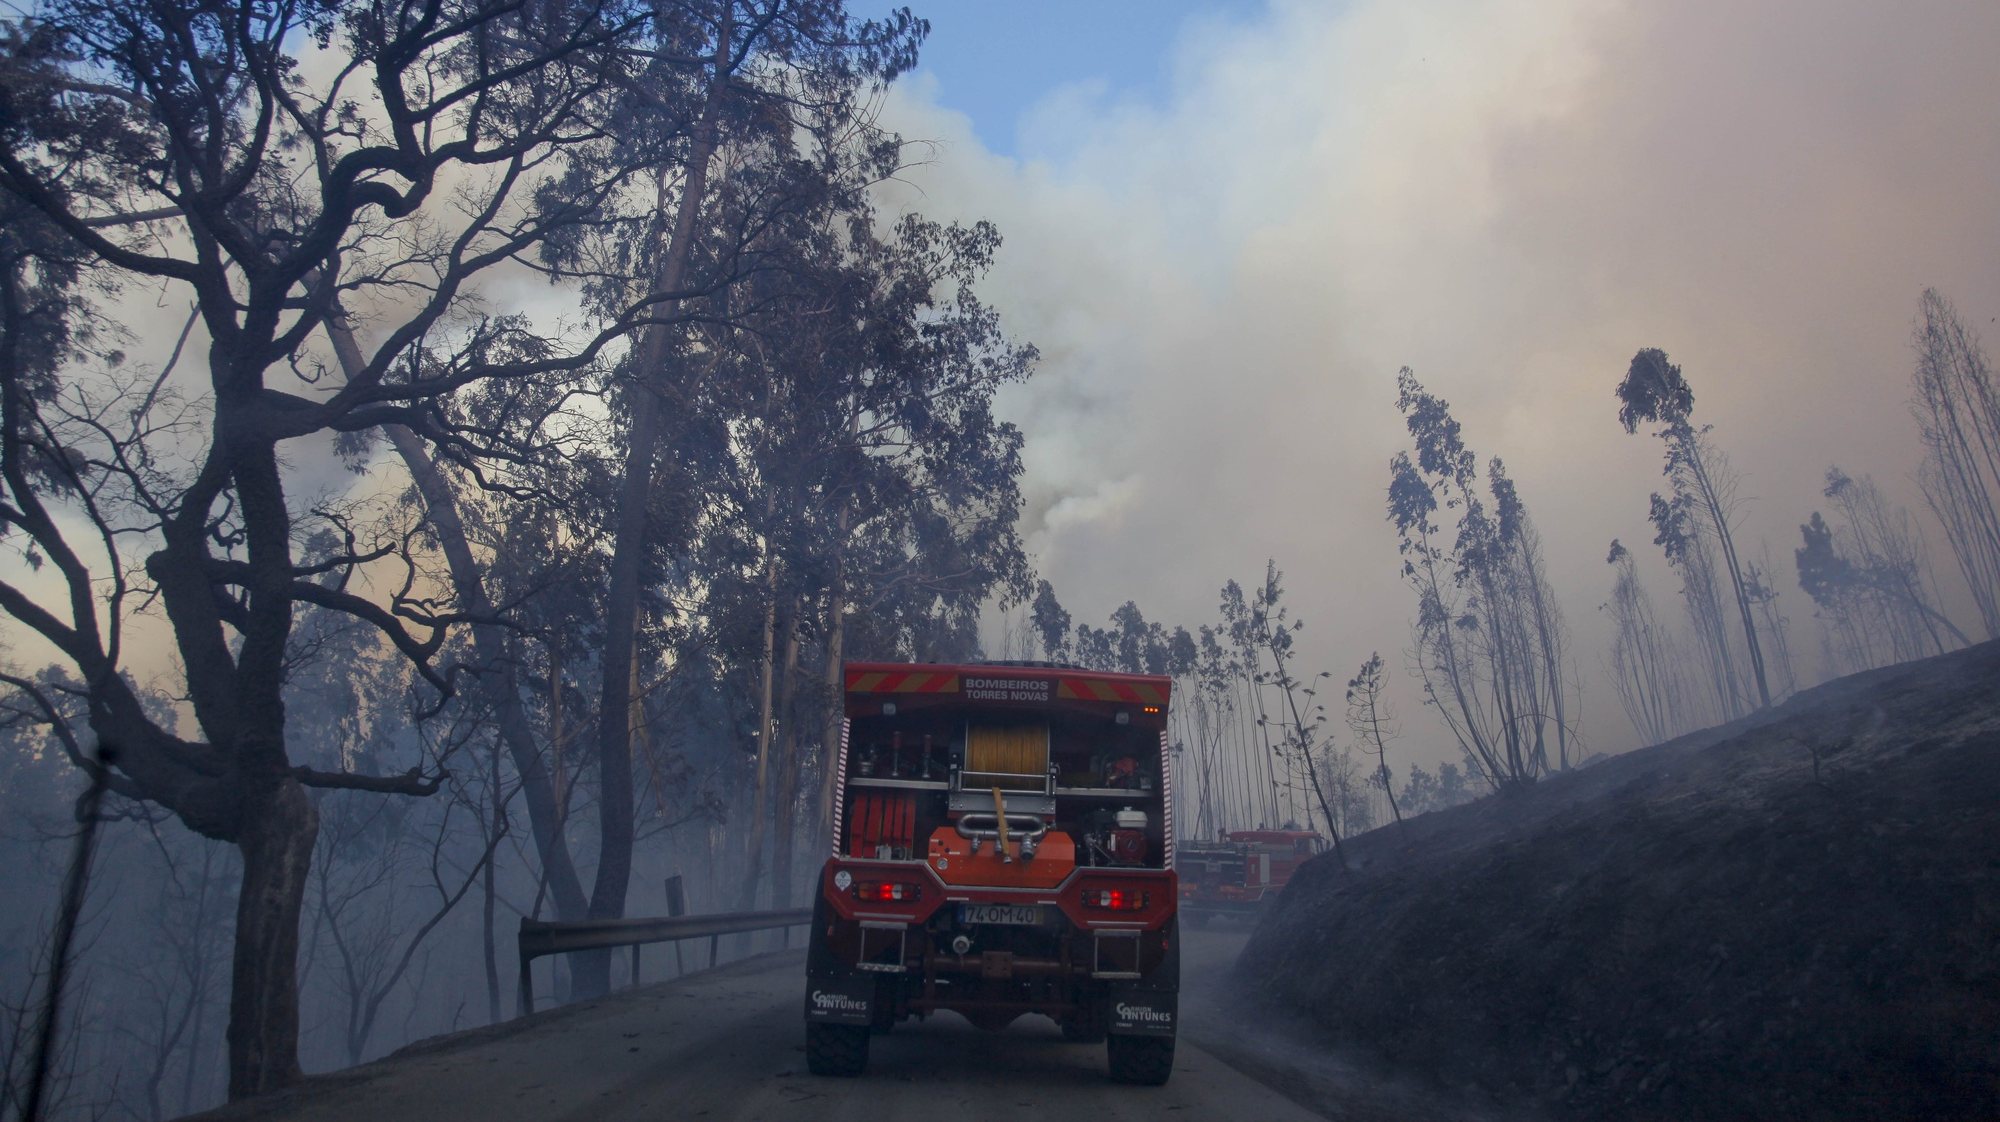 Two firefighter trucks participate in combat of a forest fire in Pedrogao Grande, center of Portugal, 6 August 2015. This forest fire gathers 104 land vehicules, 4 planes and 3 helicopters. PAULO CUNHA/LUSA